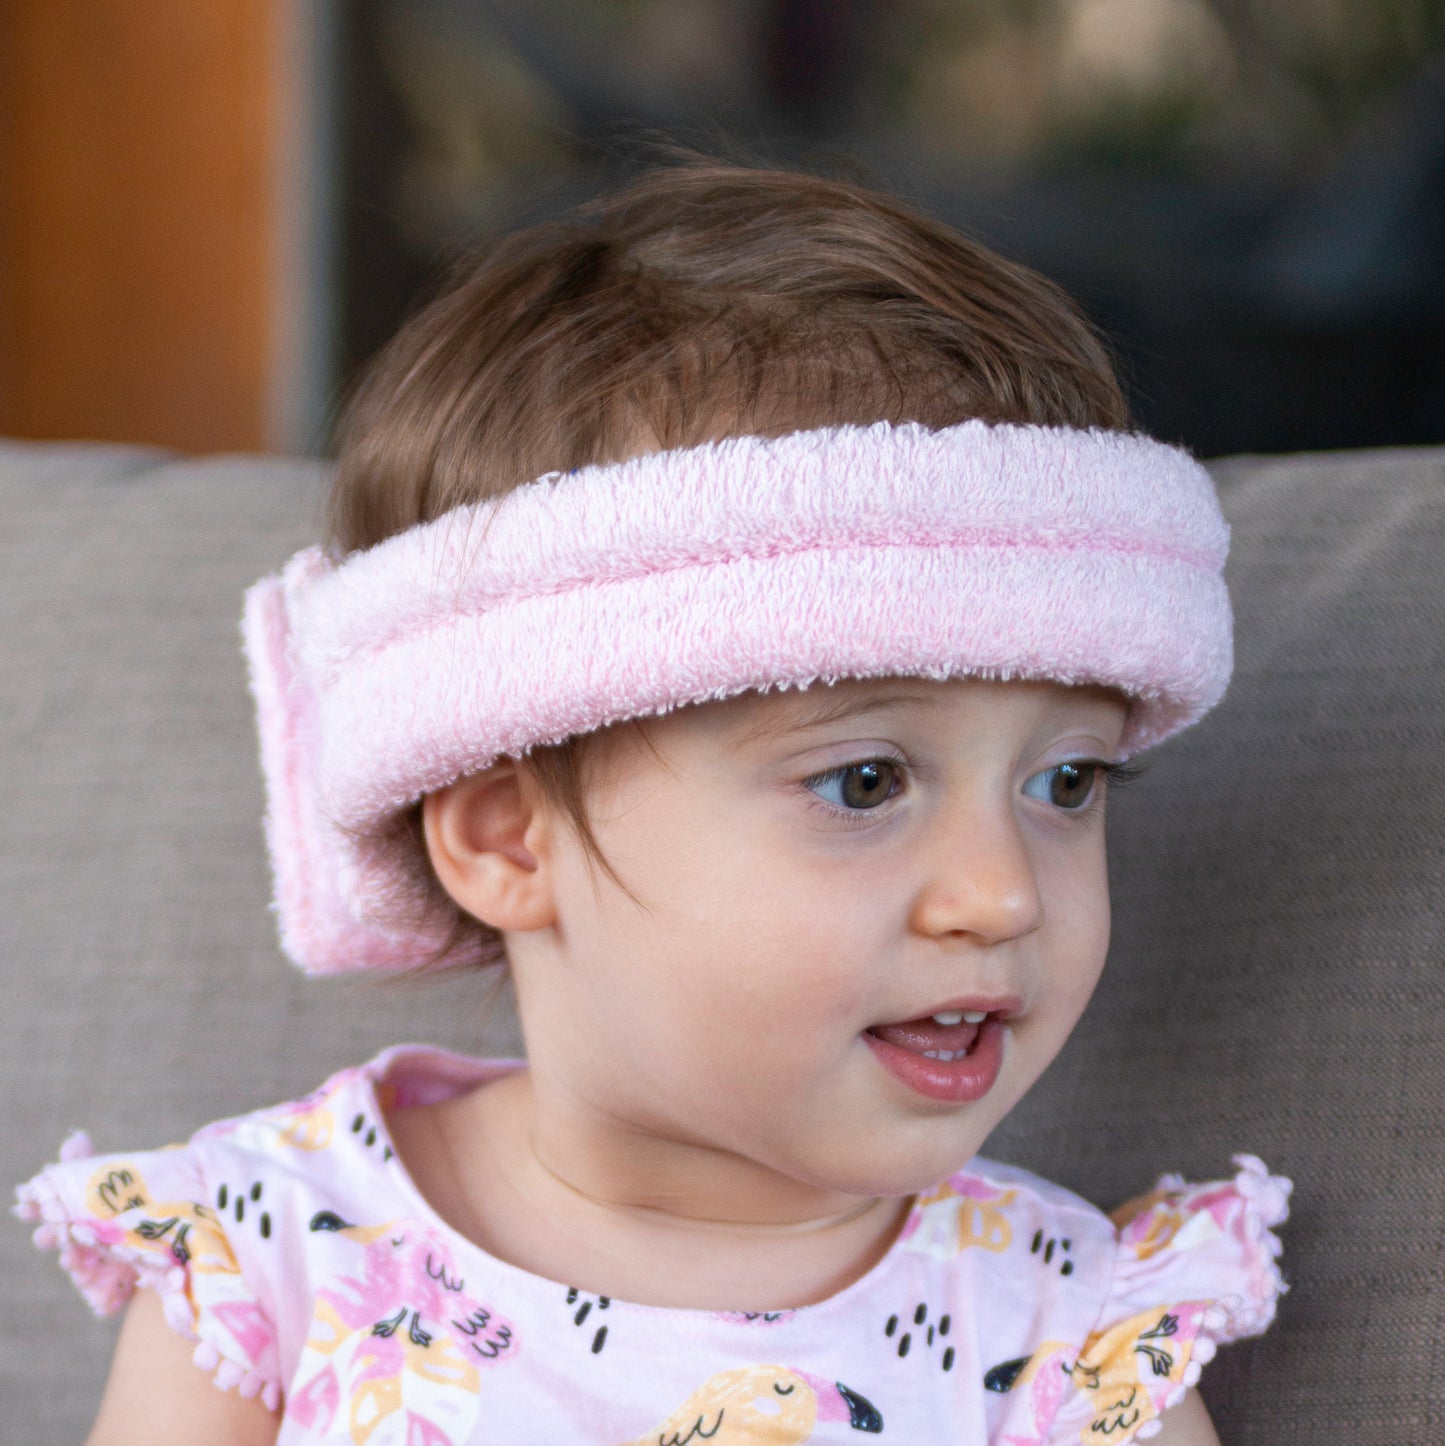 Padded Head Band, lightweight and comfortable, 3 months to 3 years old. Ideal for bumps and bruises.